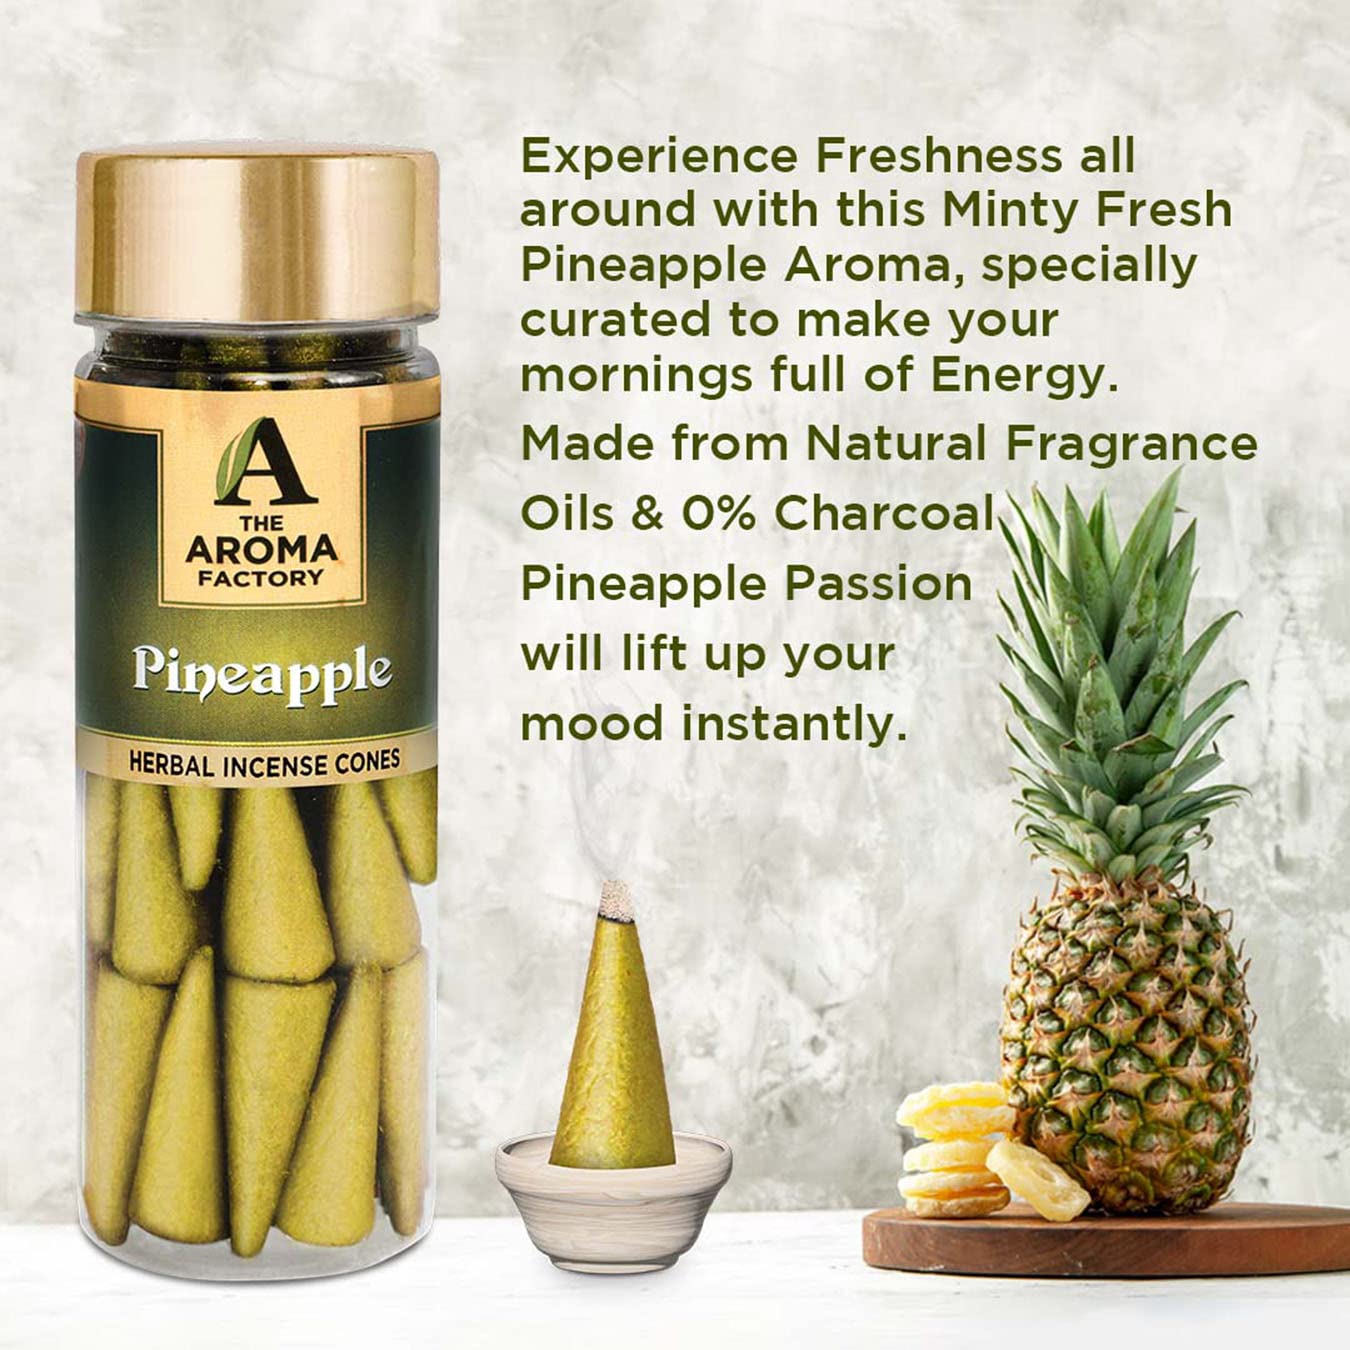 The Aroma Factory Incense Dhoop Cone for Pooja, Pineapple (100% Herbal & 0% Charcoal) 1 Bottle x 30 Cones